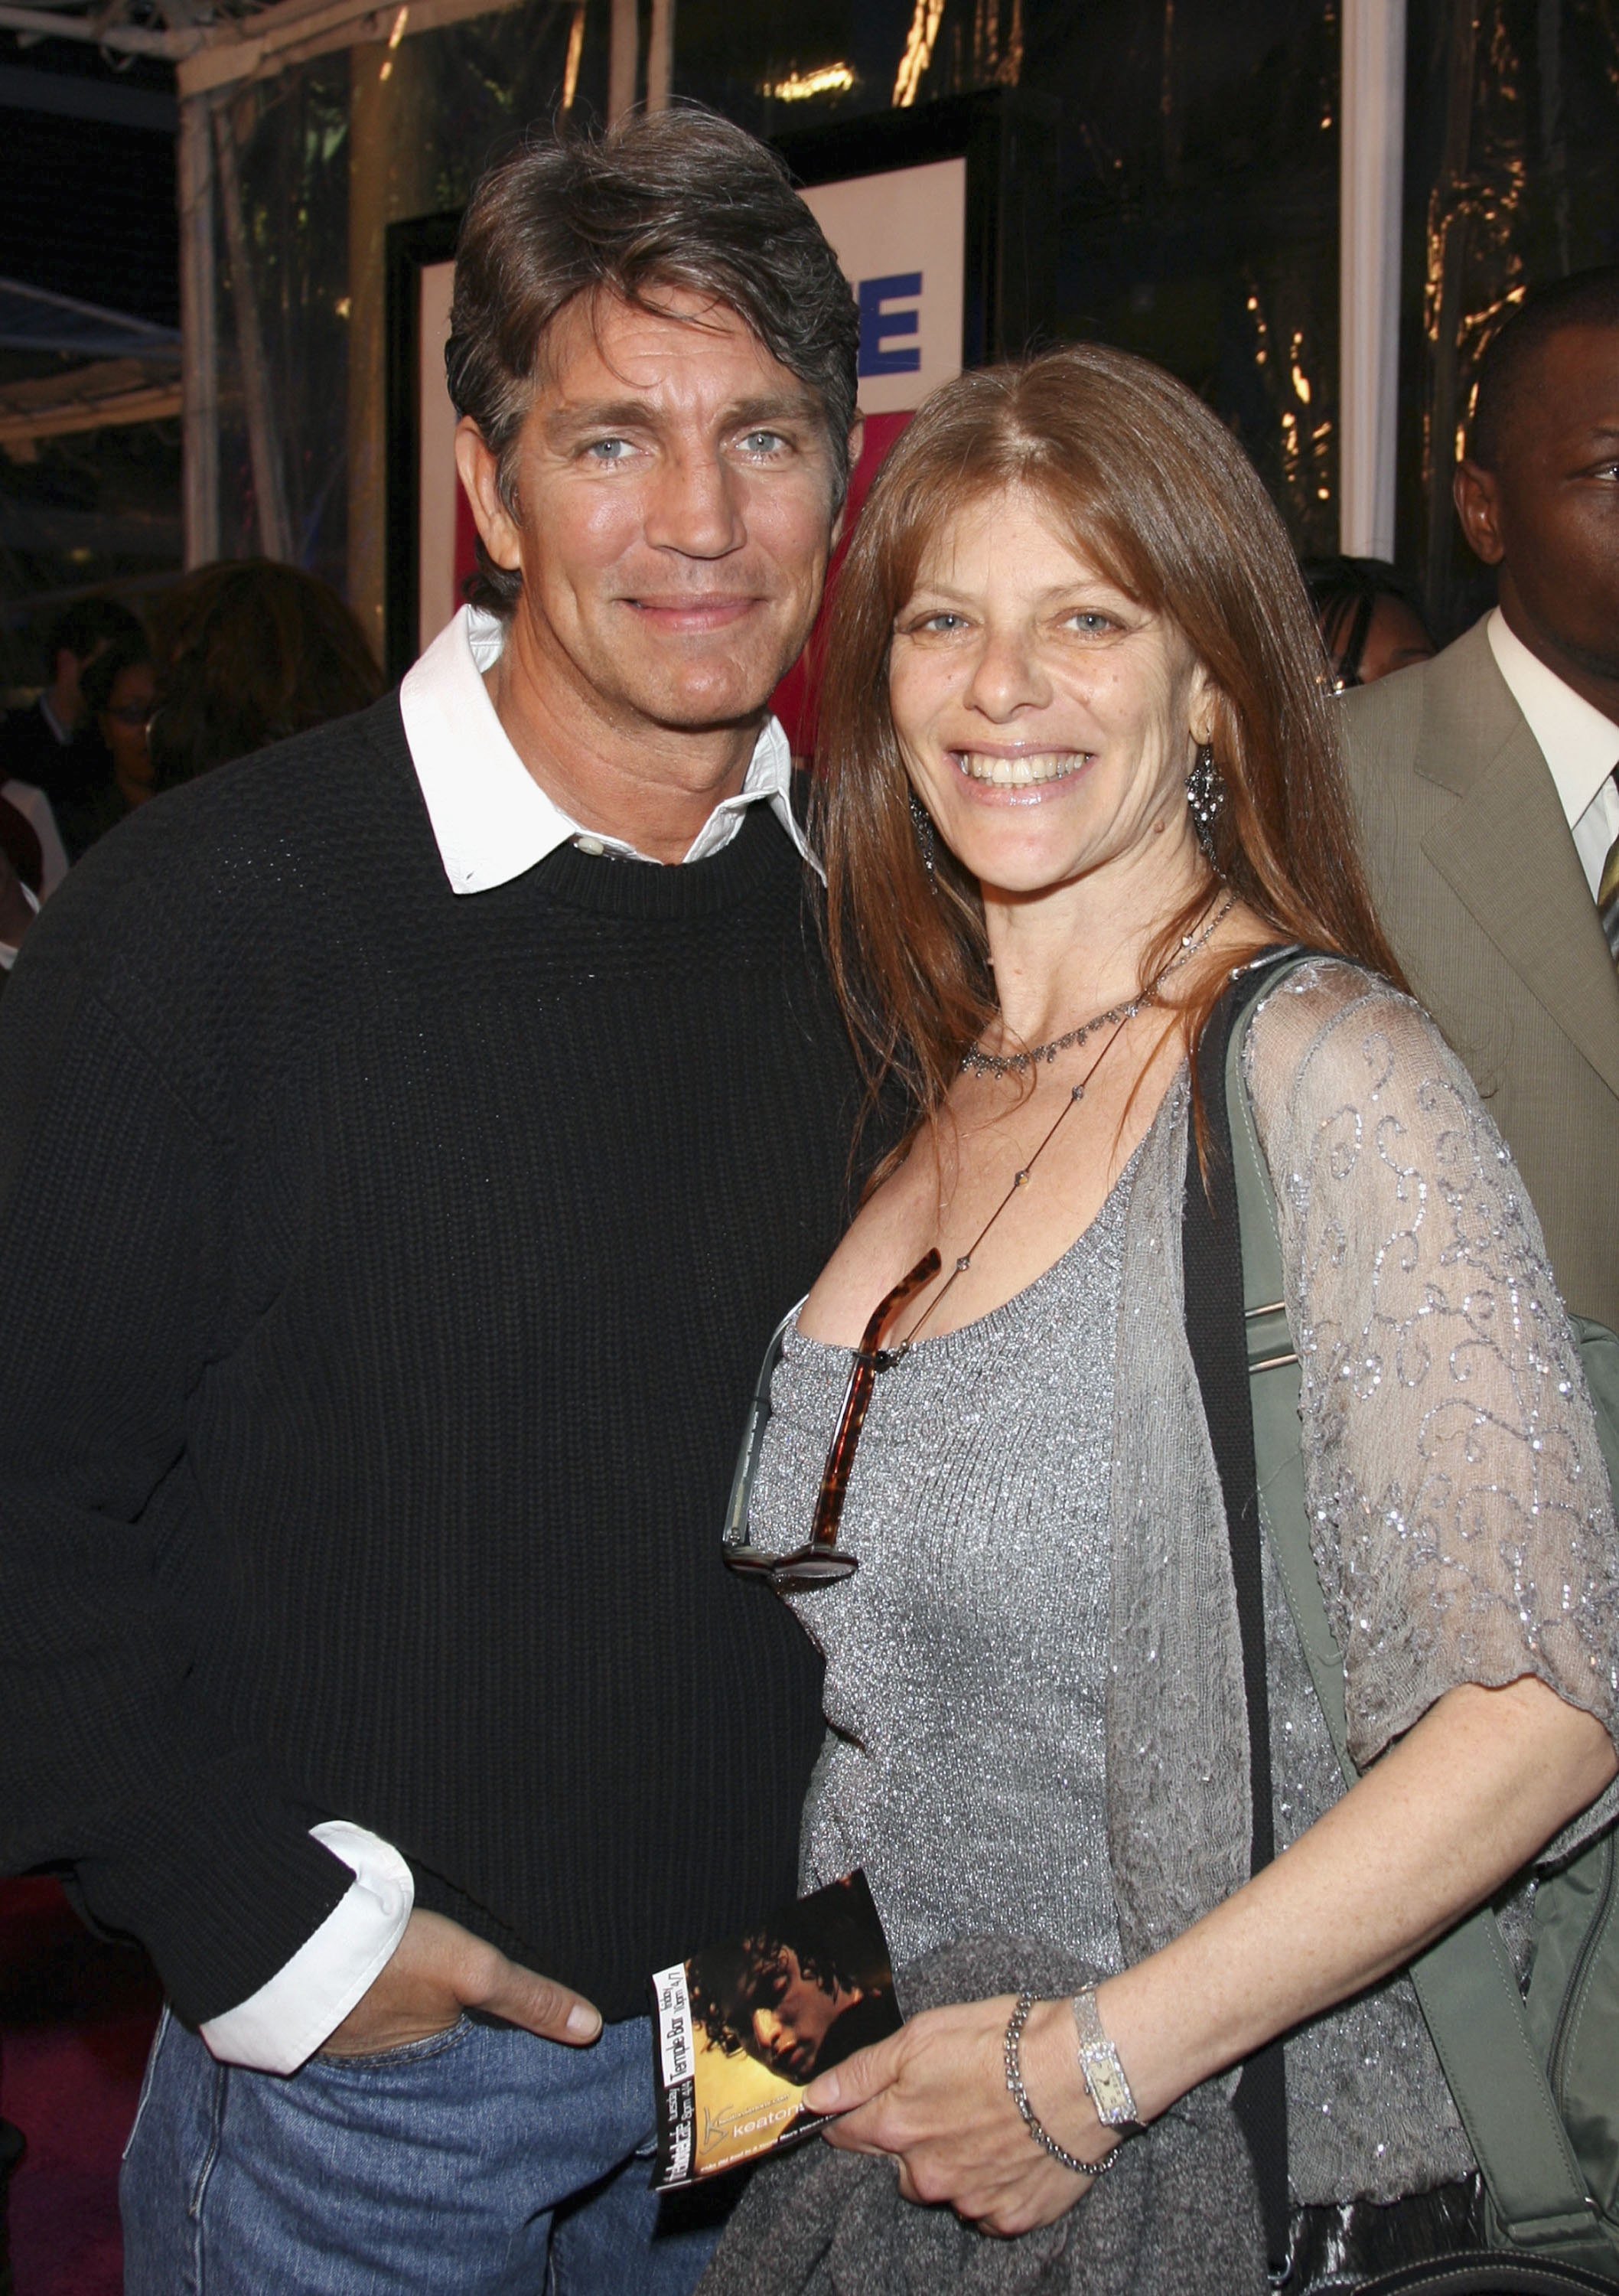 Actor Eric Roberts and his wife Eliza pose at the premiere of Fox Searchlight's "Phat Girlz" at the ArcLight Cinema's on April 3, 2006 in Los Angeles, California. | Source: Getty Images